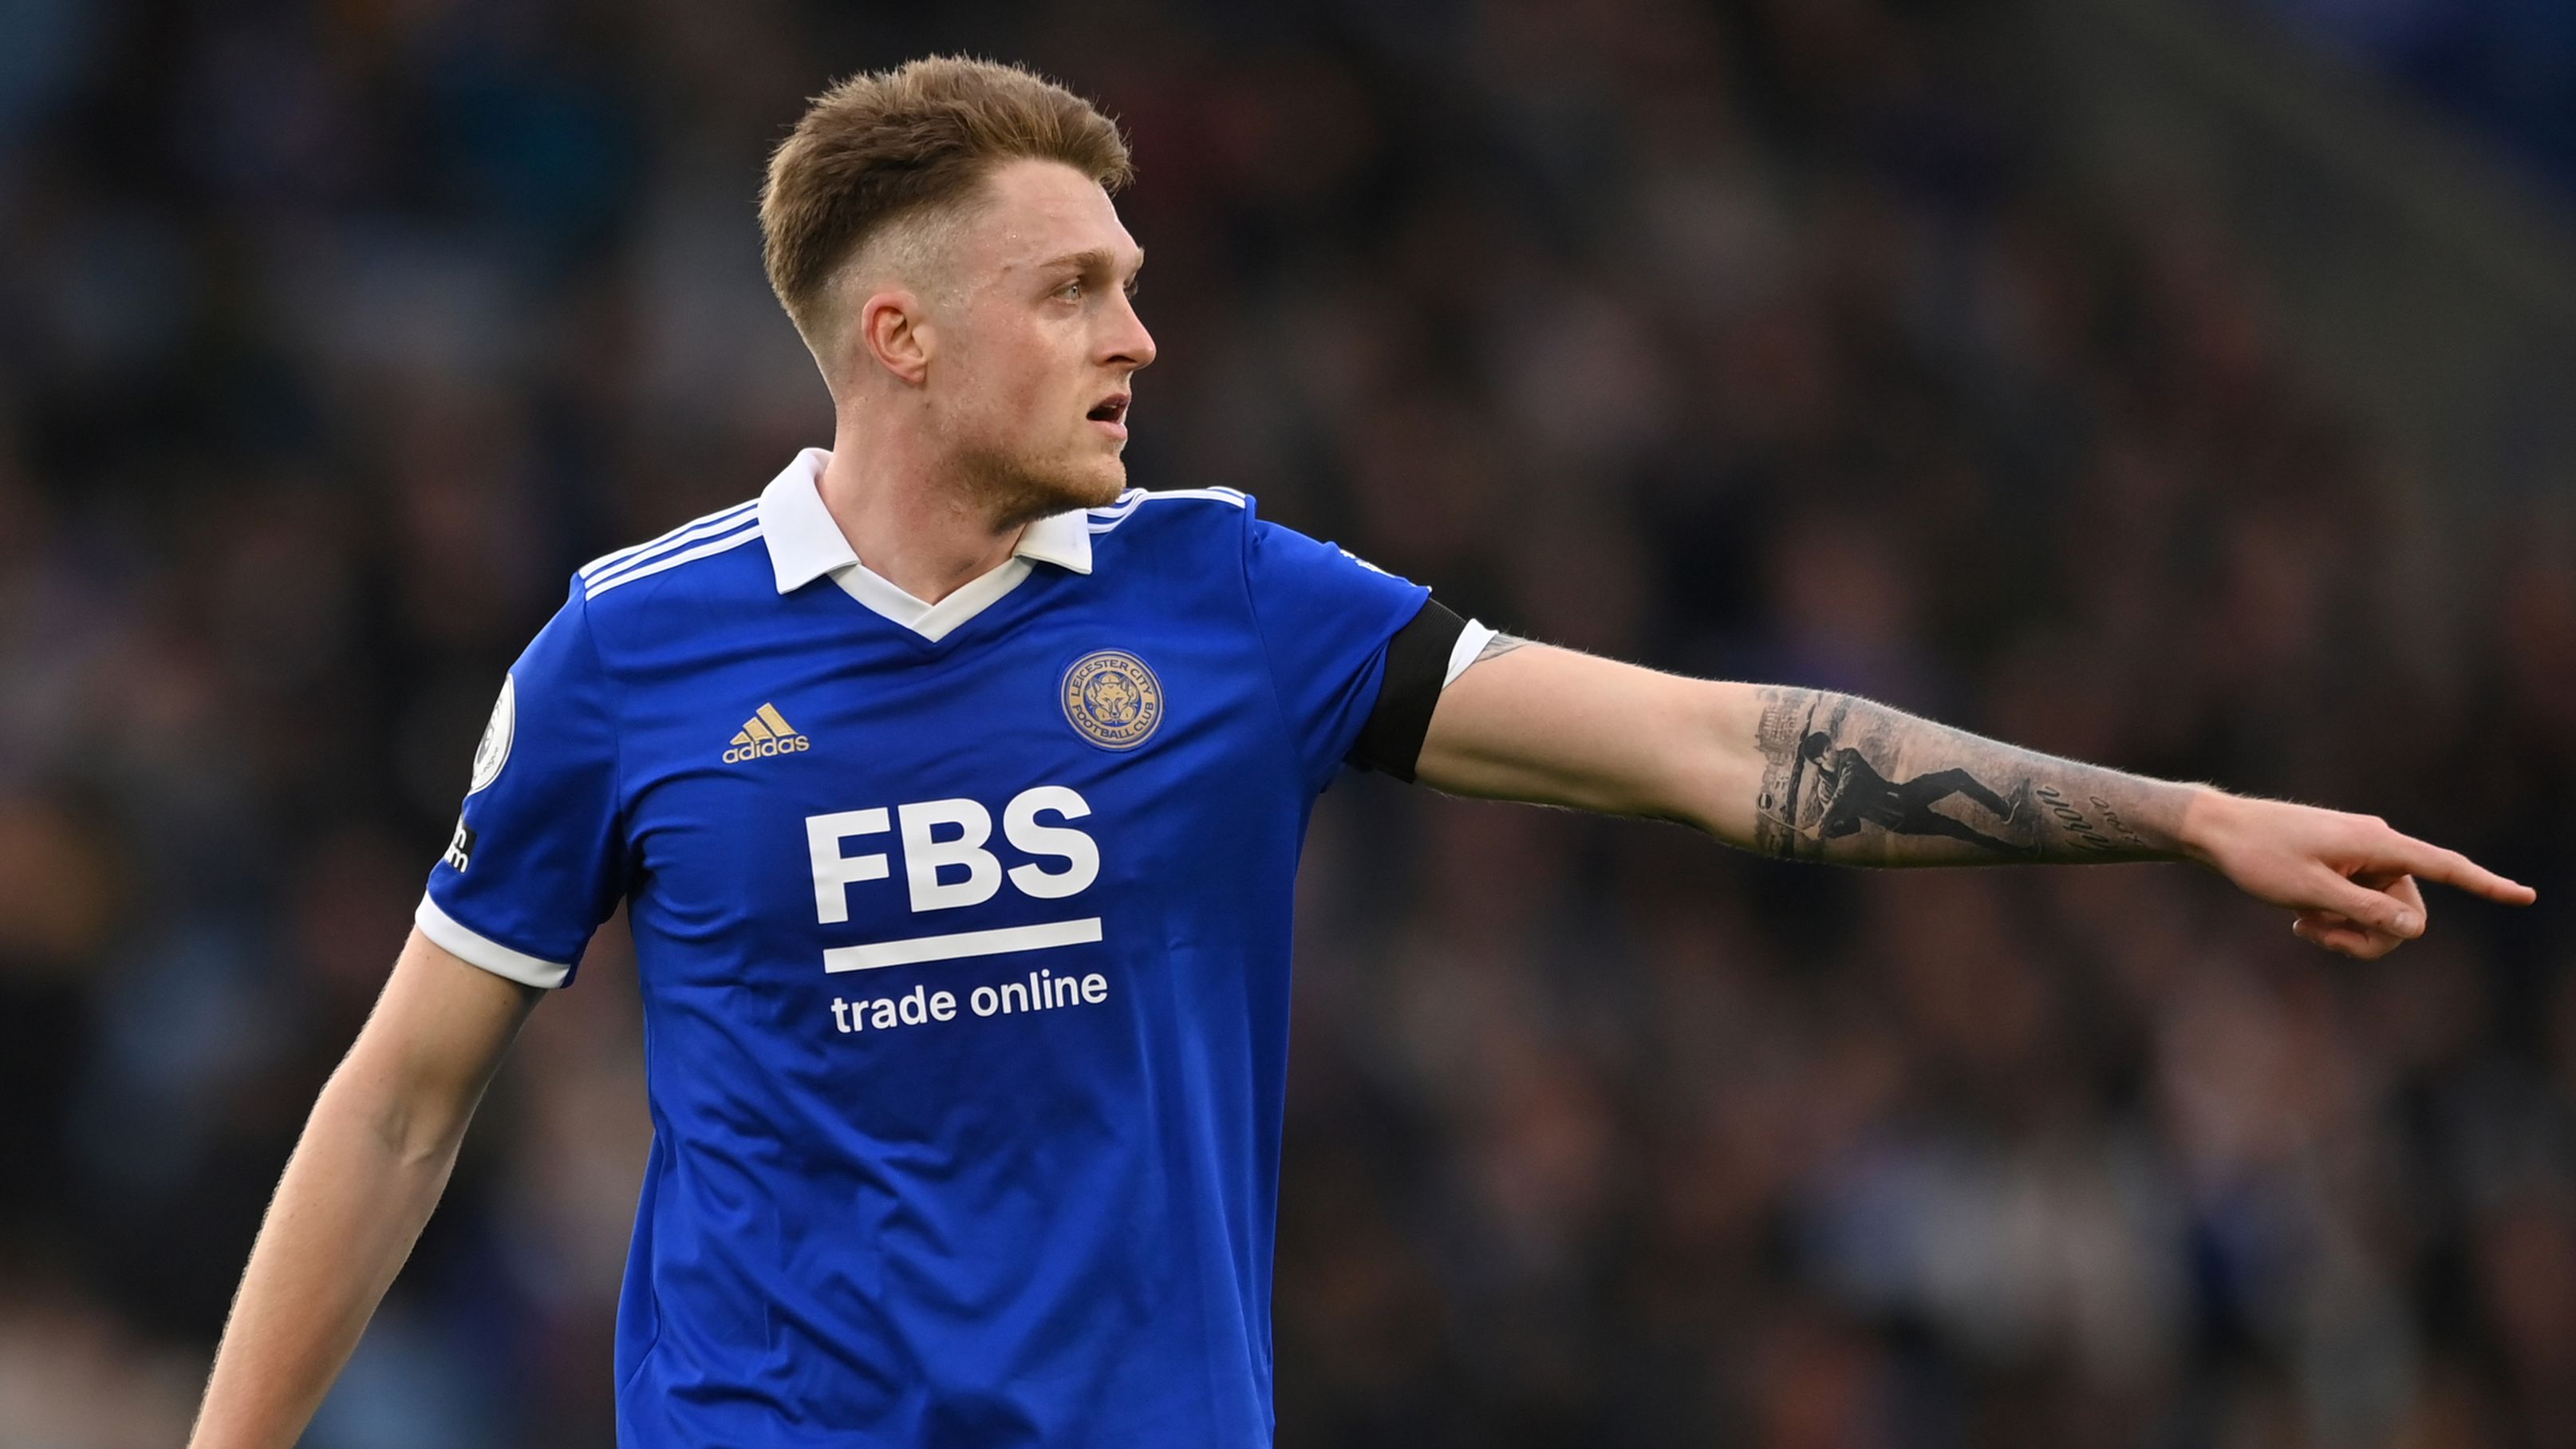 Coach 'absolutely delighted' as Socceroos hero Harry Souttar continues strong EPL form